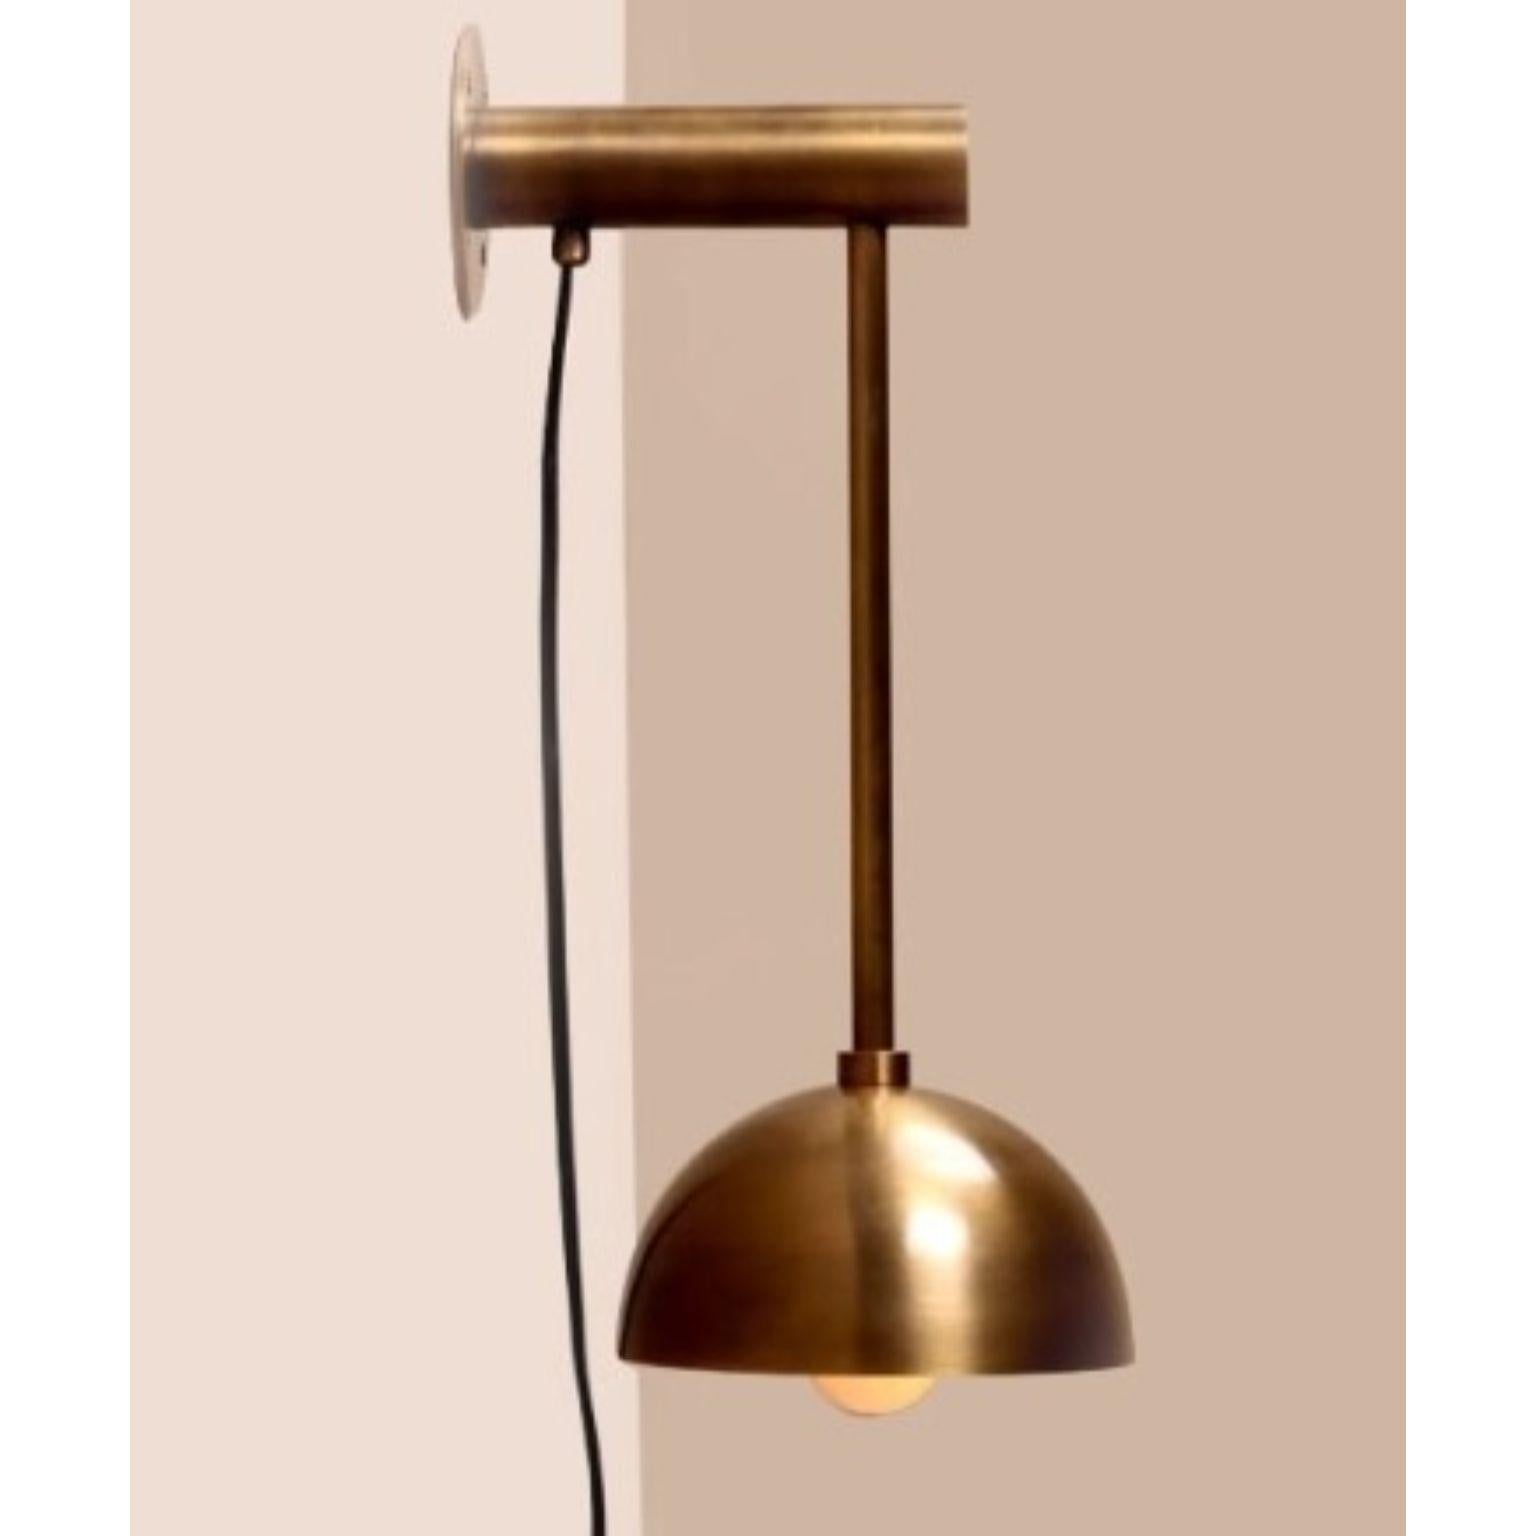 Dot Medium Brass Dome Wall Sconce by Lamp Shaper
Dimensions: D 15 x W 19 x H 43 cm.
Materials: Brass.

Different finishes are available: raw brass, aged brass, burnt brass, and brushed brass. Please contact us.
All our lamps can be wired according